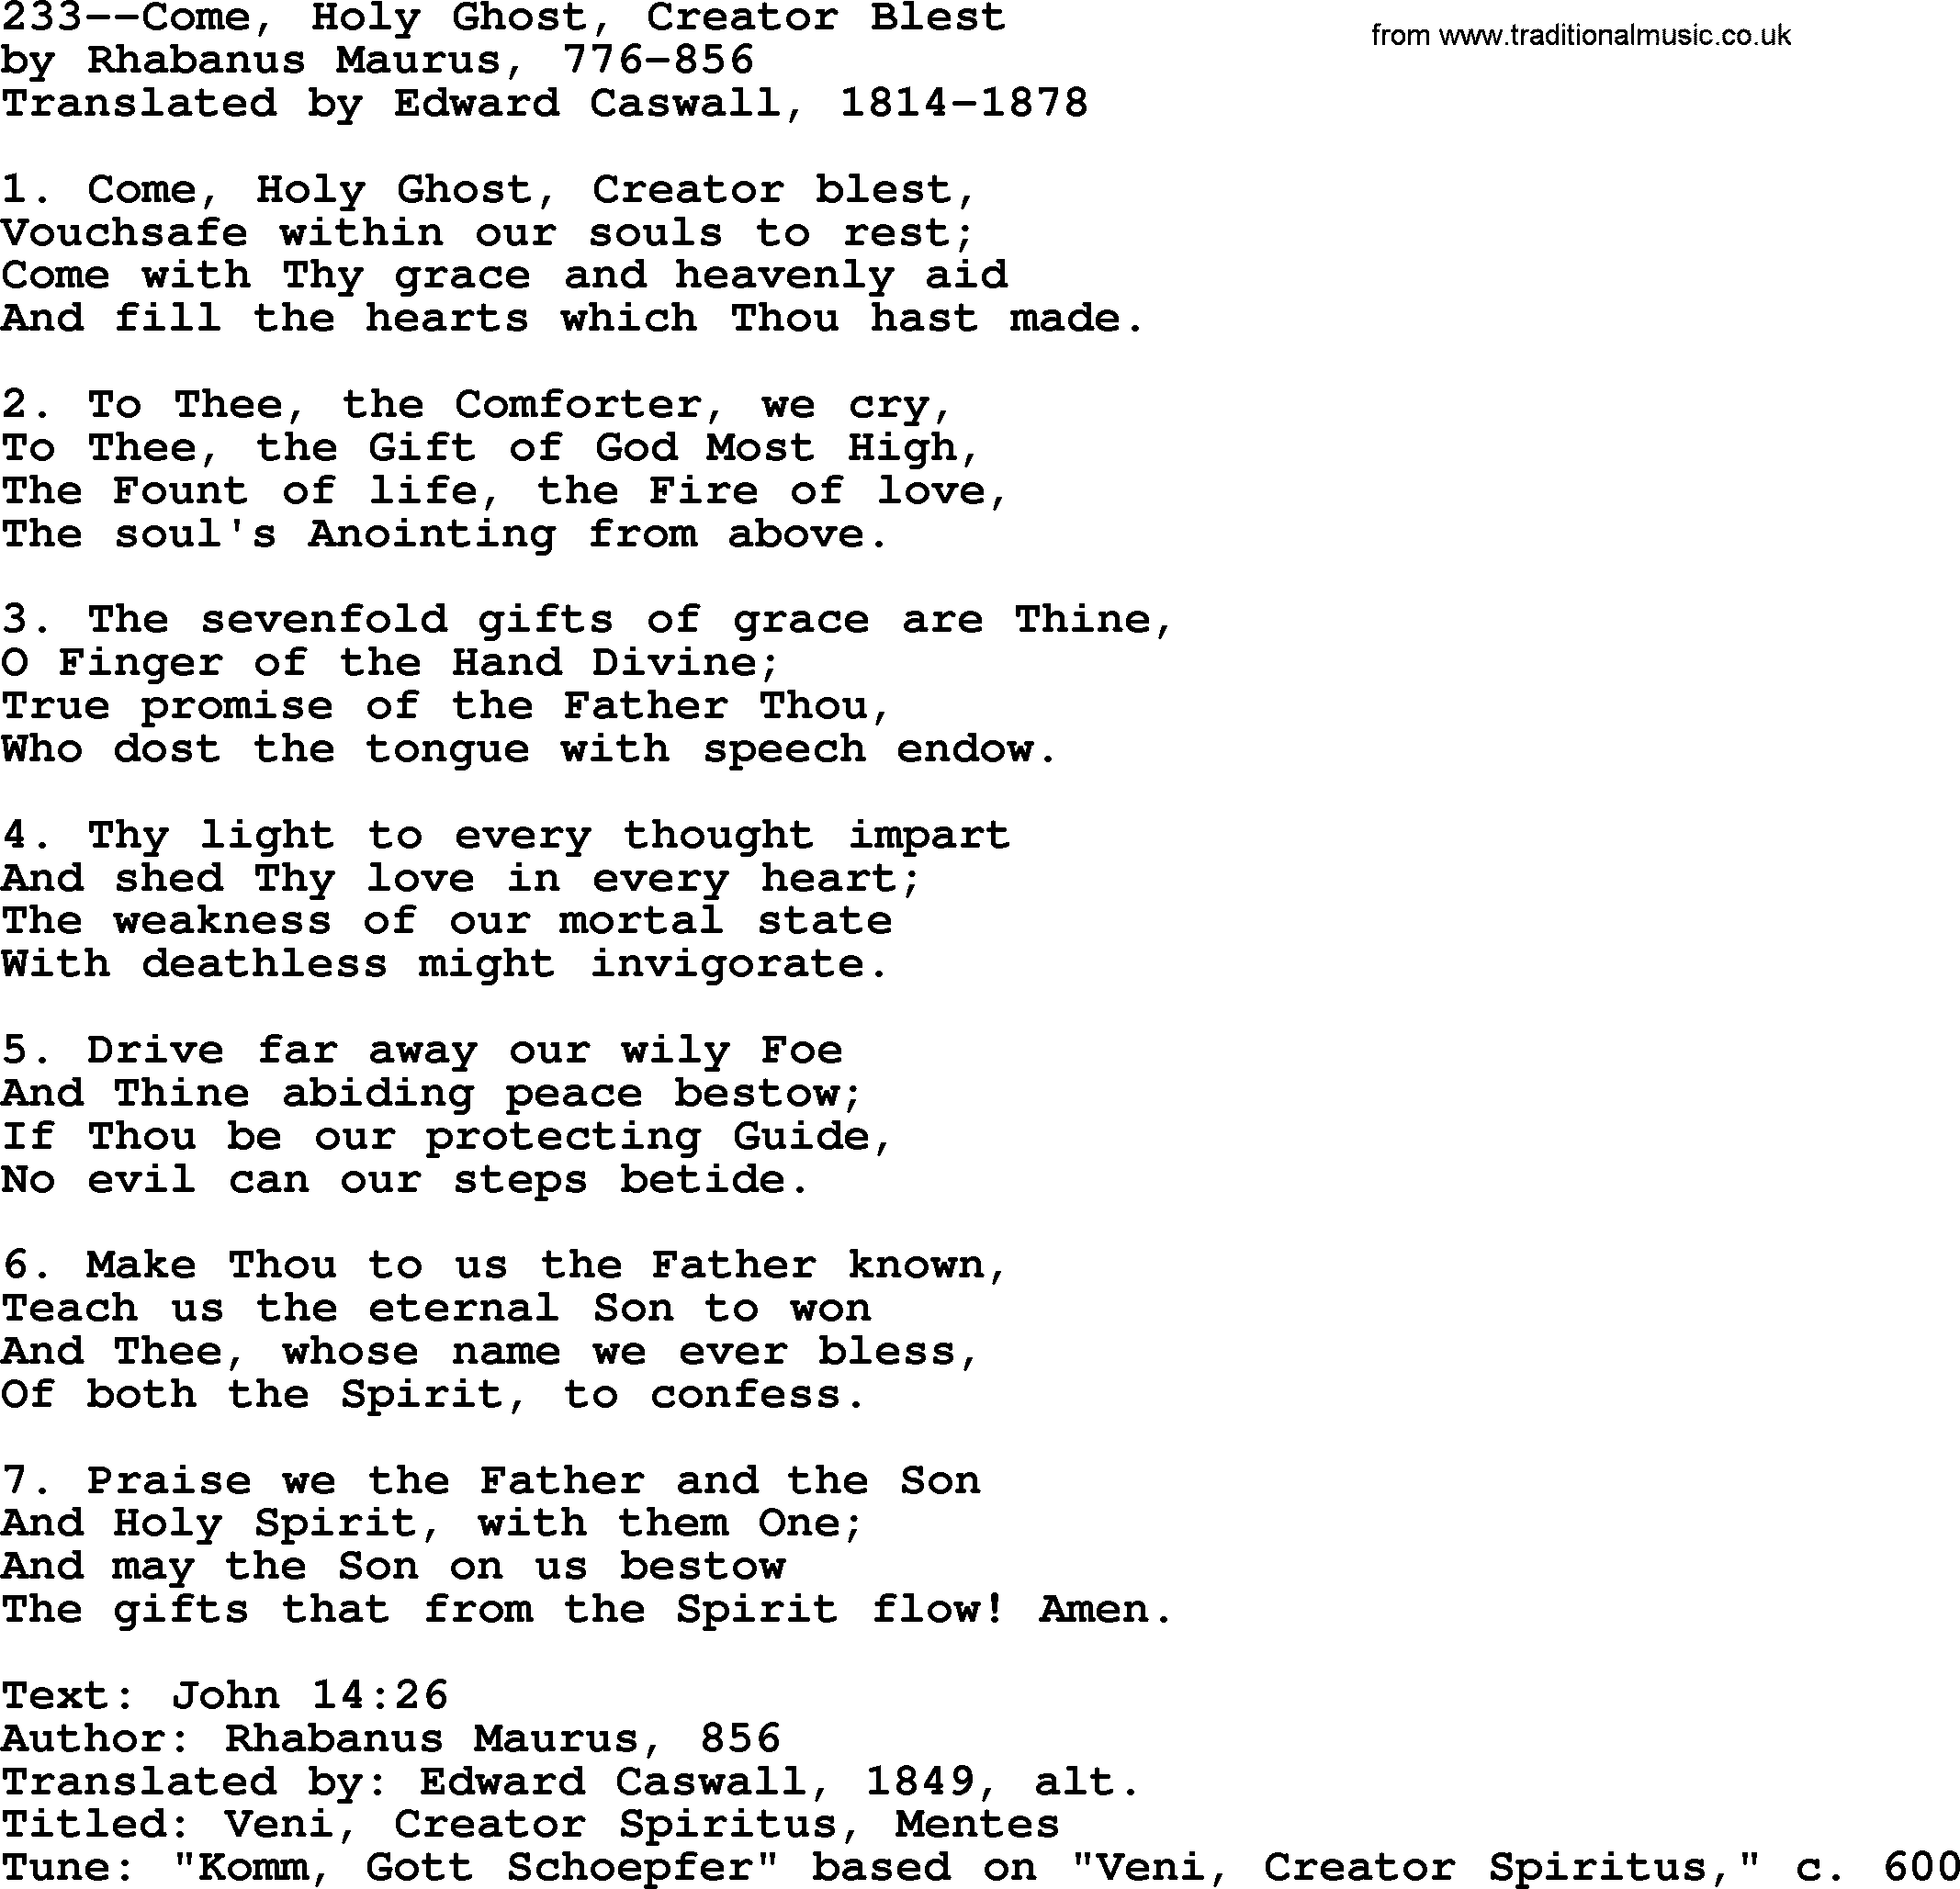 Lutheran Hymn: 233--Come, Holy Ghost, Creator Blest.txt lyrics with PDF